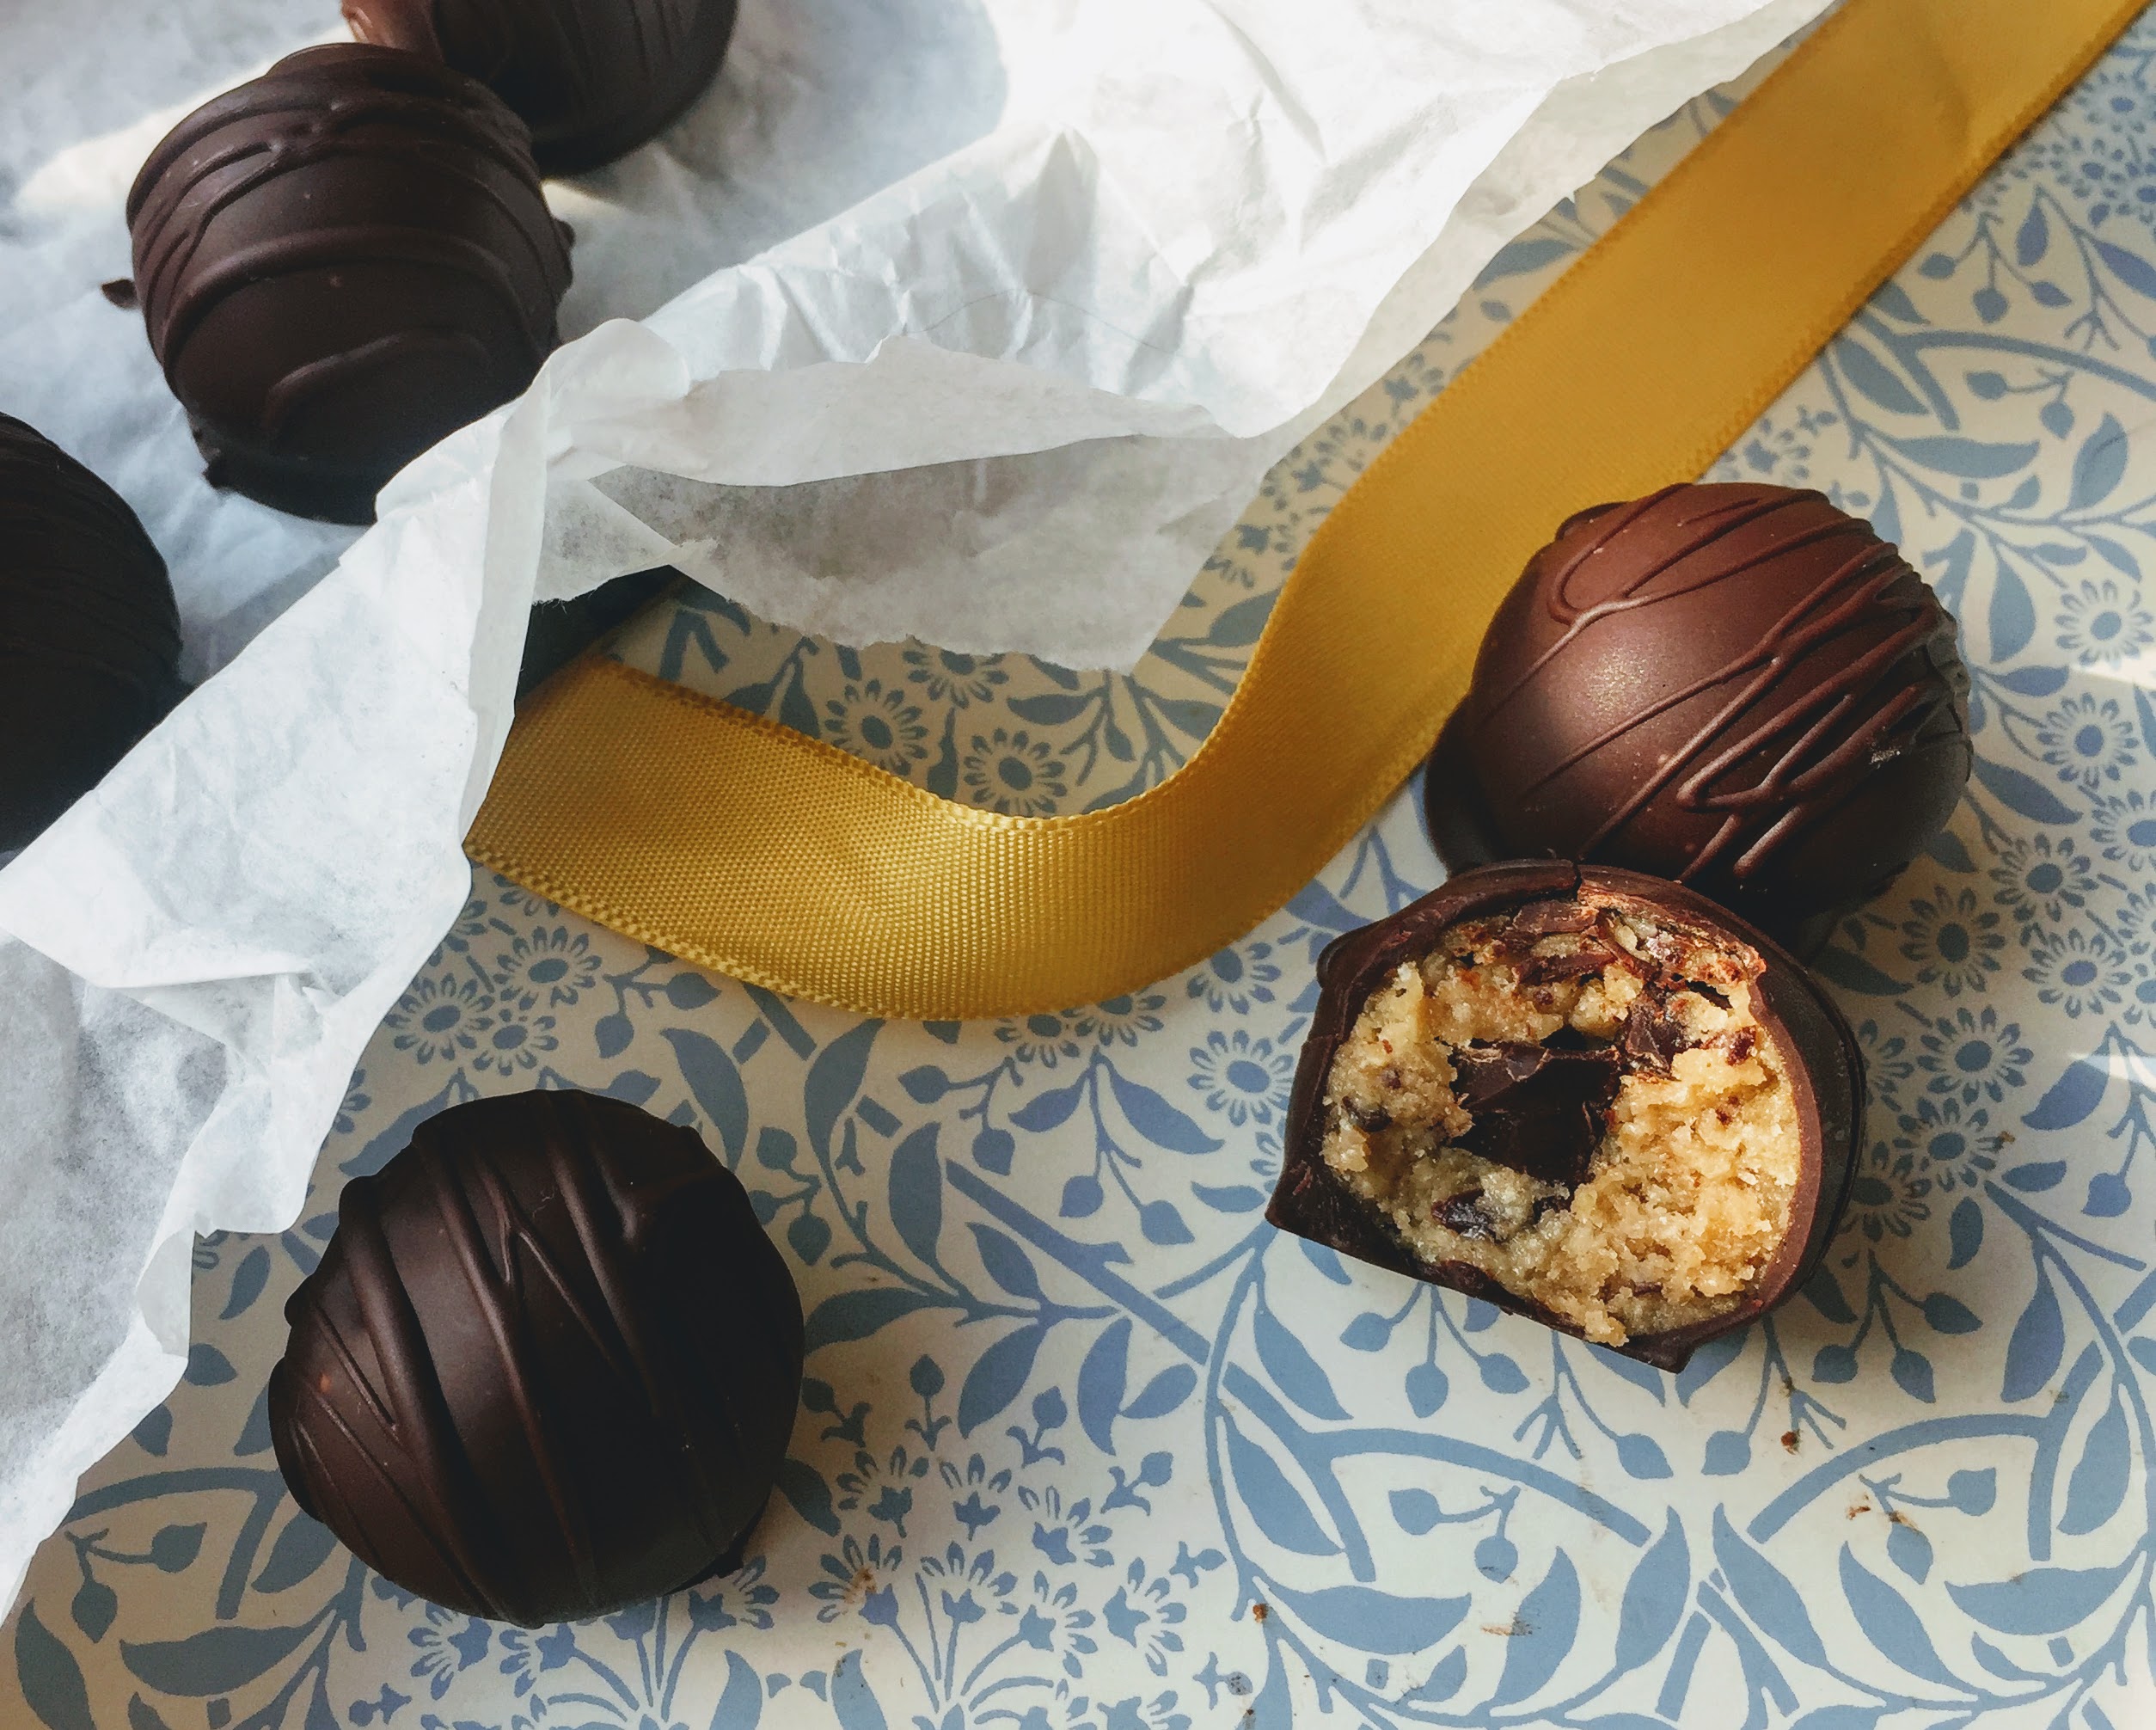 Chocolate-coated cookie dough bites are scattered on a blue floral tray. The chocolate coating is shiny and smooth with streaks of chocolate drizzled on top. One of the chocolates has a bite taken out of it to reveal a golden cookie dough center with small chunks of dark chocolate.